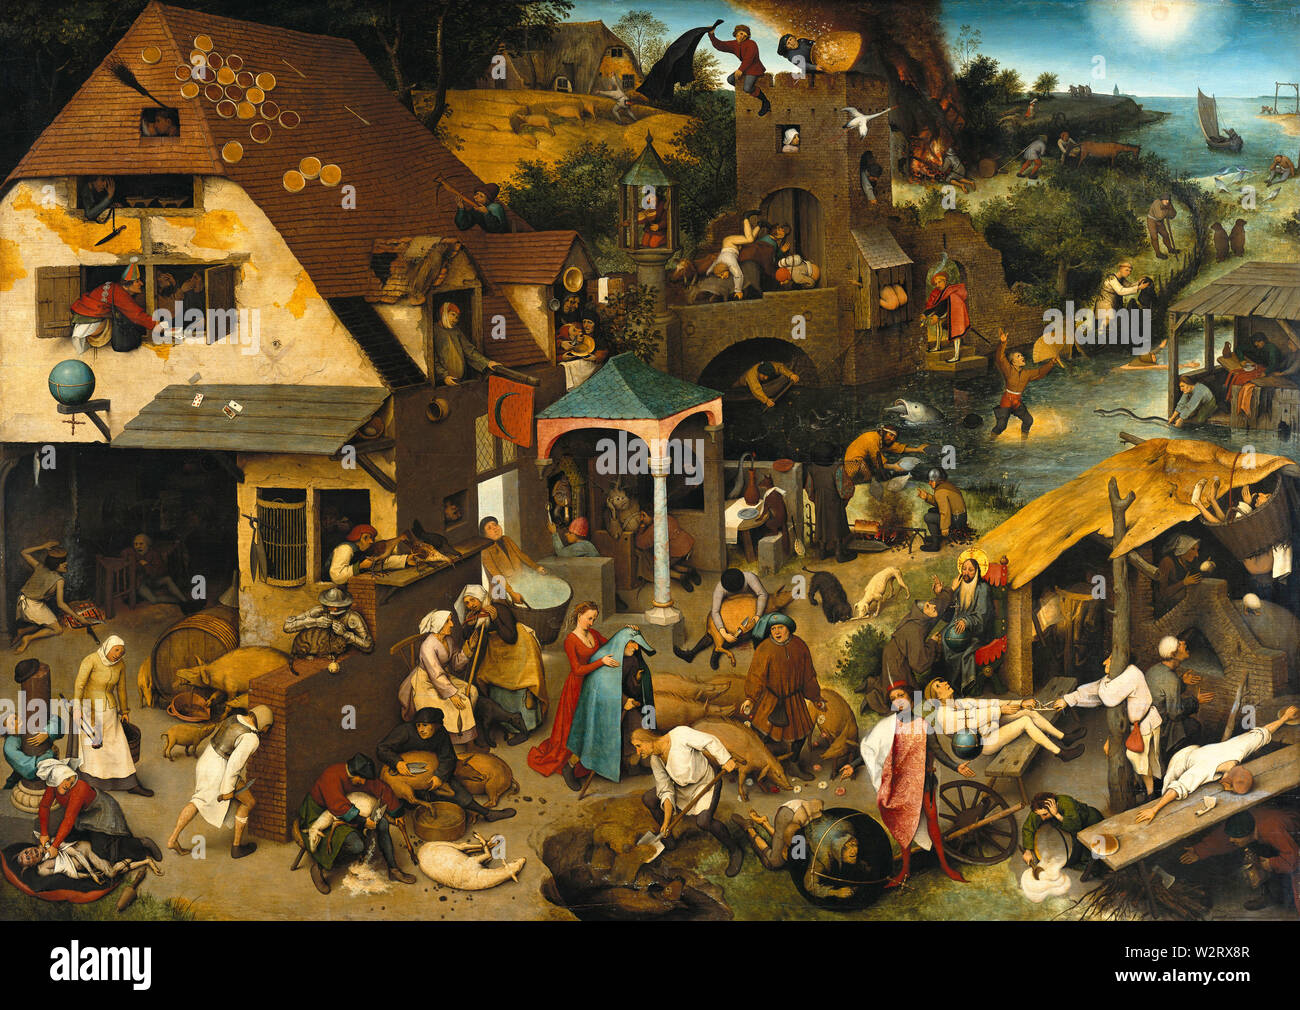 Dutch Proverbs (Netherlandish Proverbs) (1559) painting by Pieter Bruegel (Brueghel) the Elder (I) Very high quality and resolution image Stock Photo